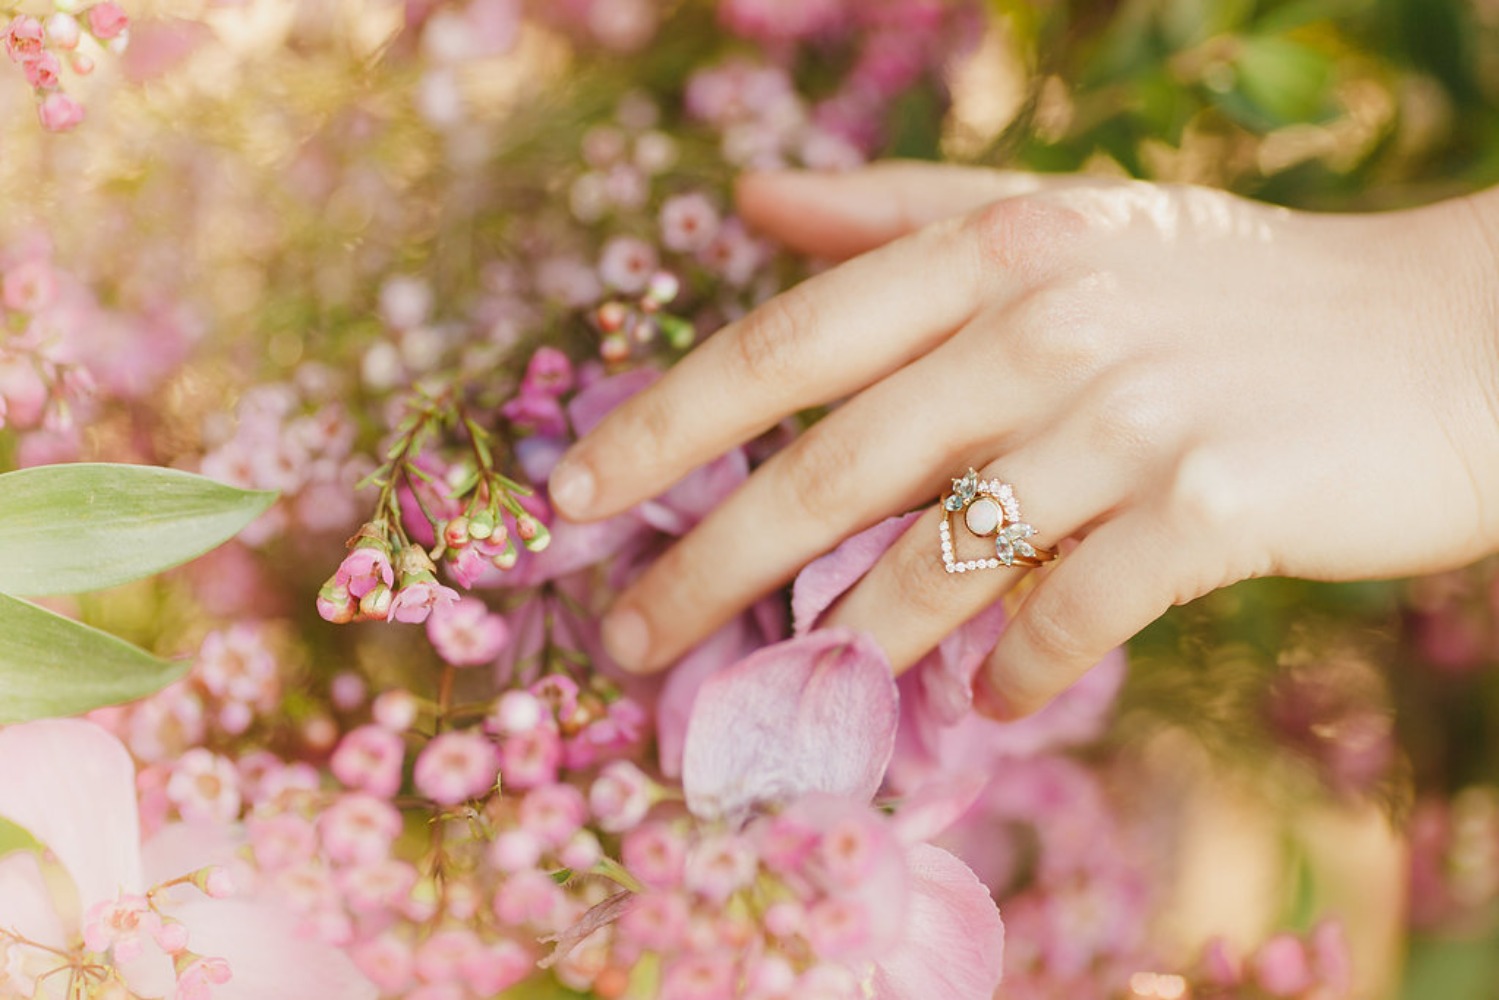 Floral Fairytale Shoot at Heavenly Oaks Flower Farm Bride with Ring